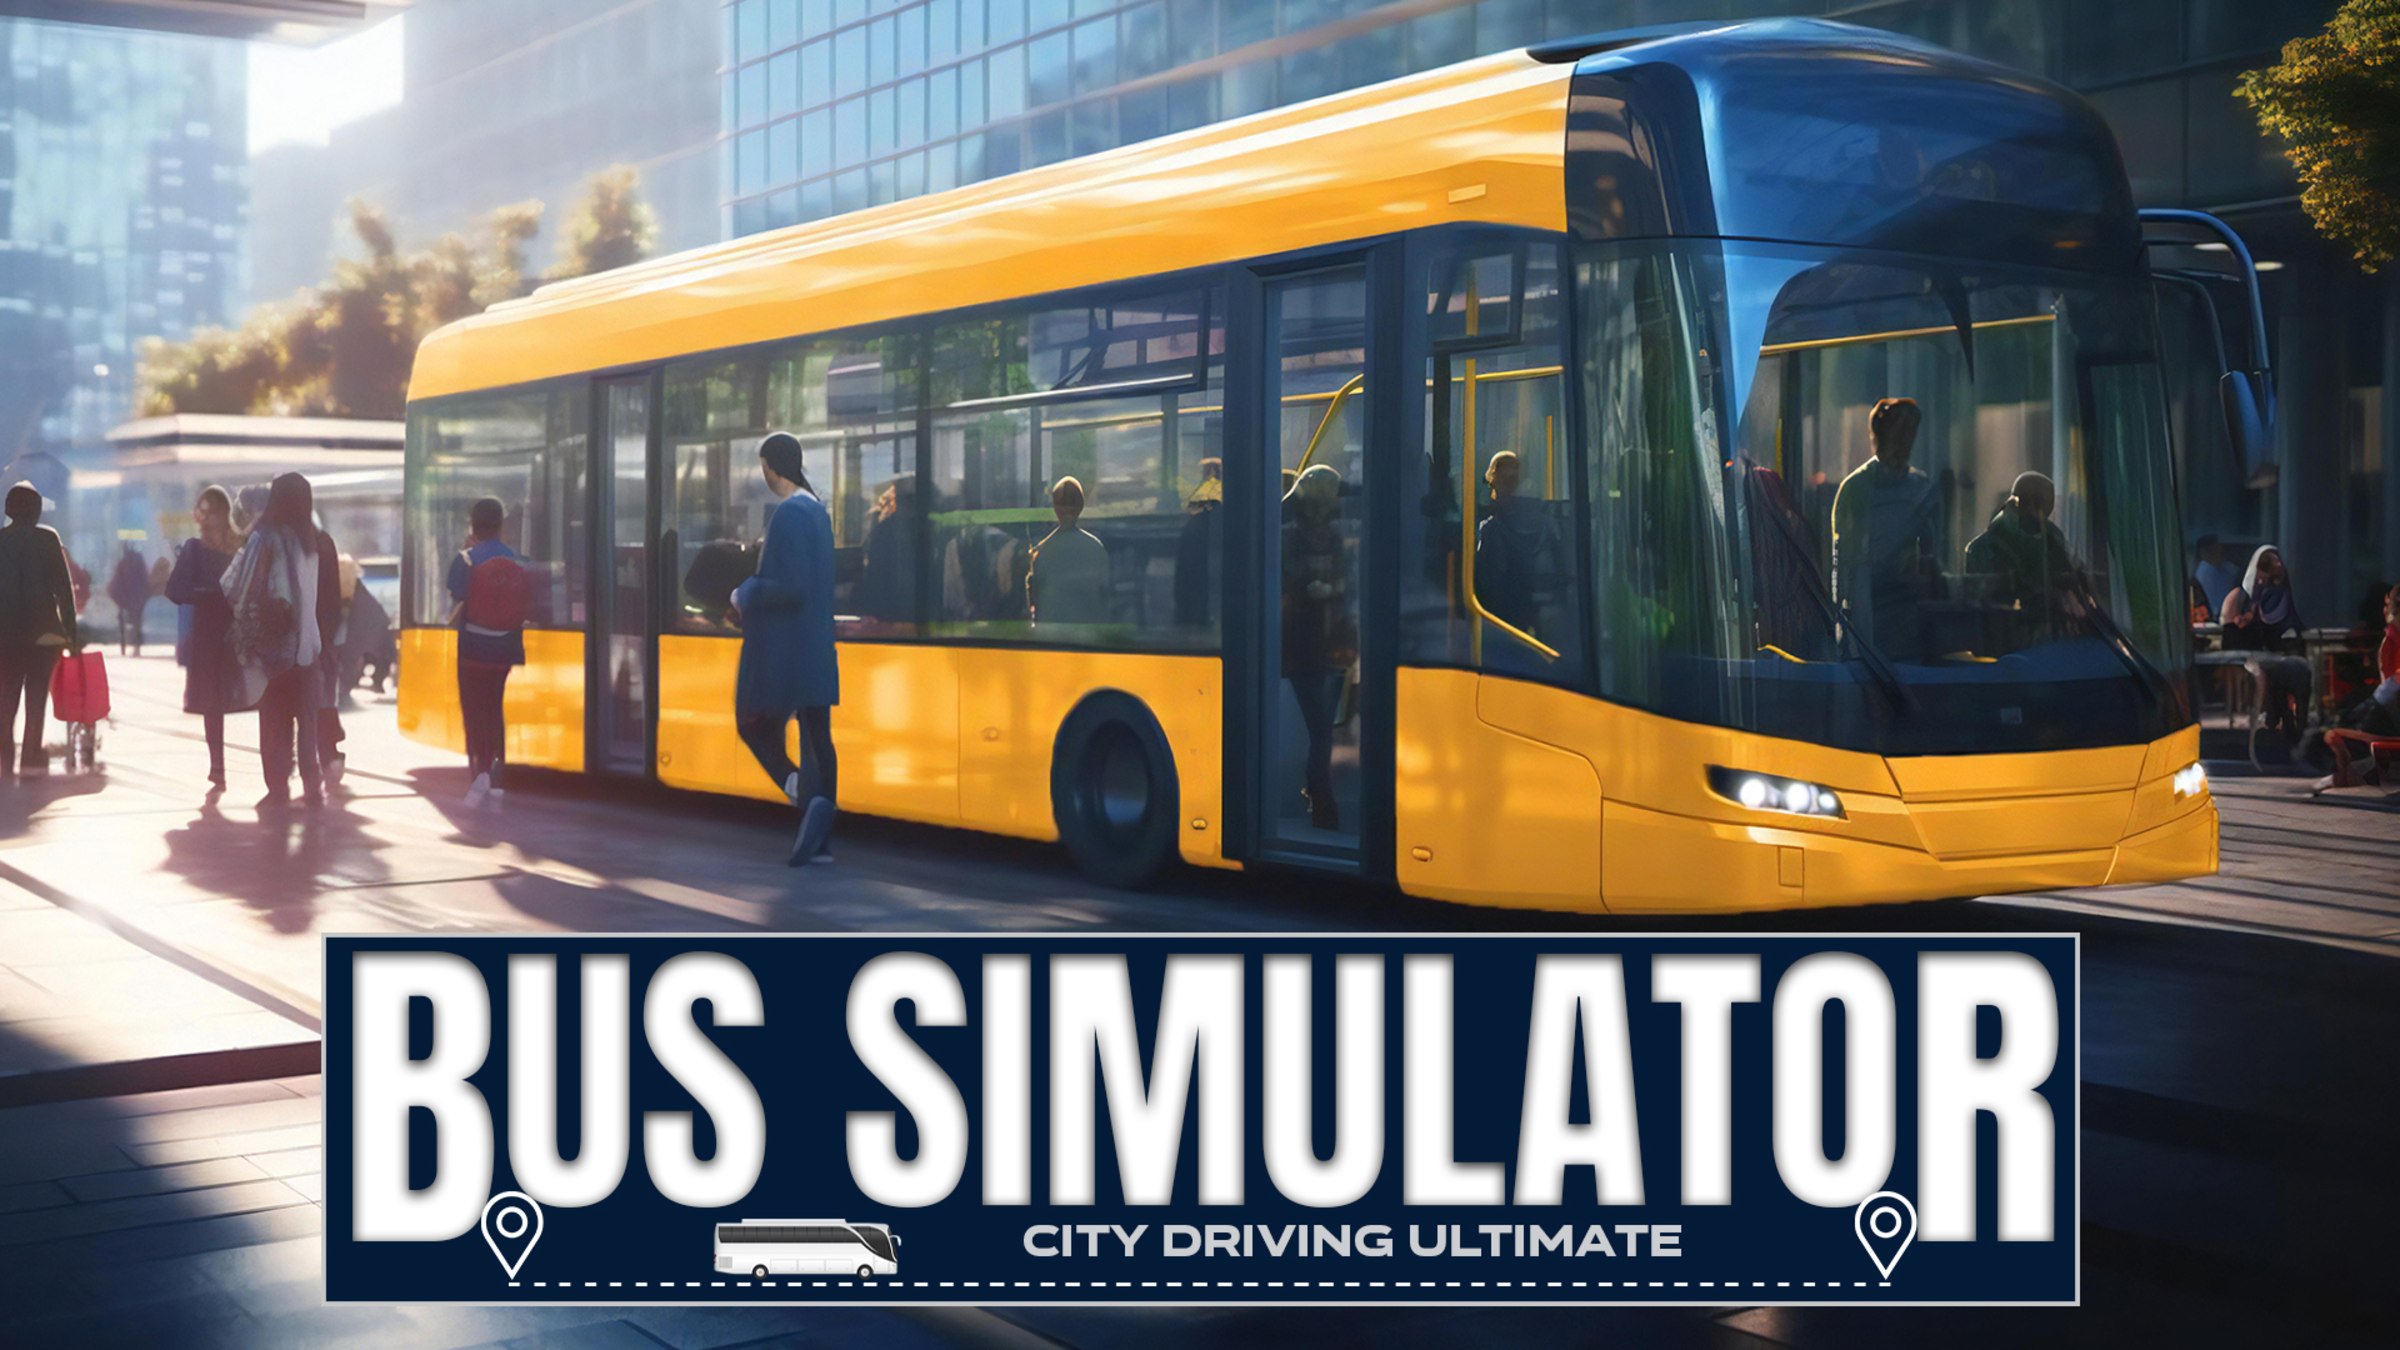 Heavy Bus Simulator - Check Out the Bus Simulator Game